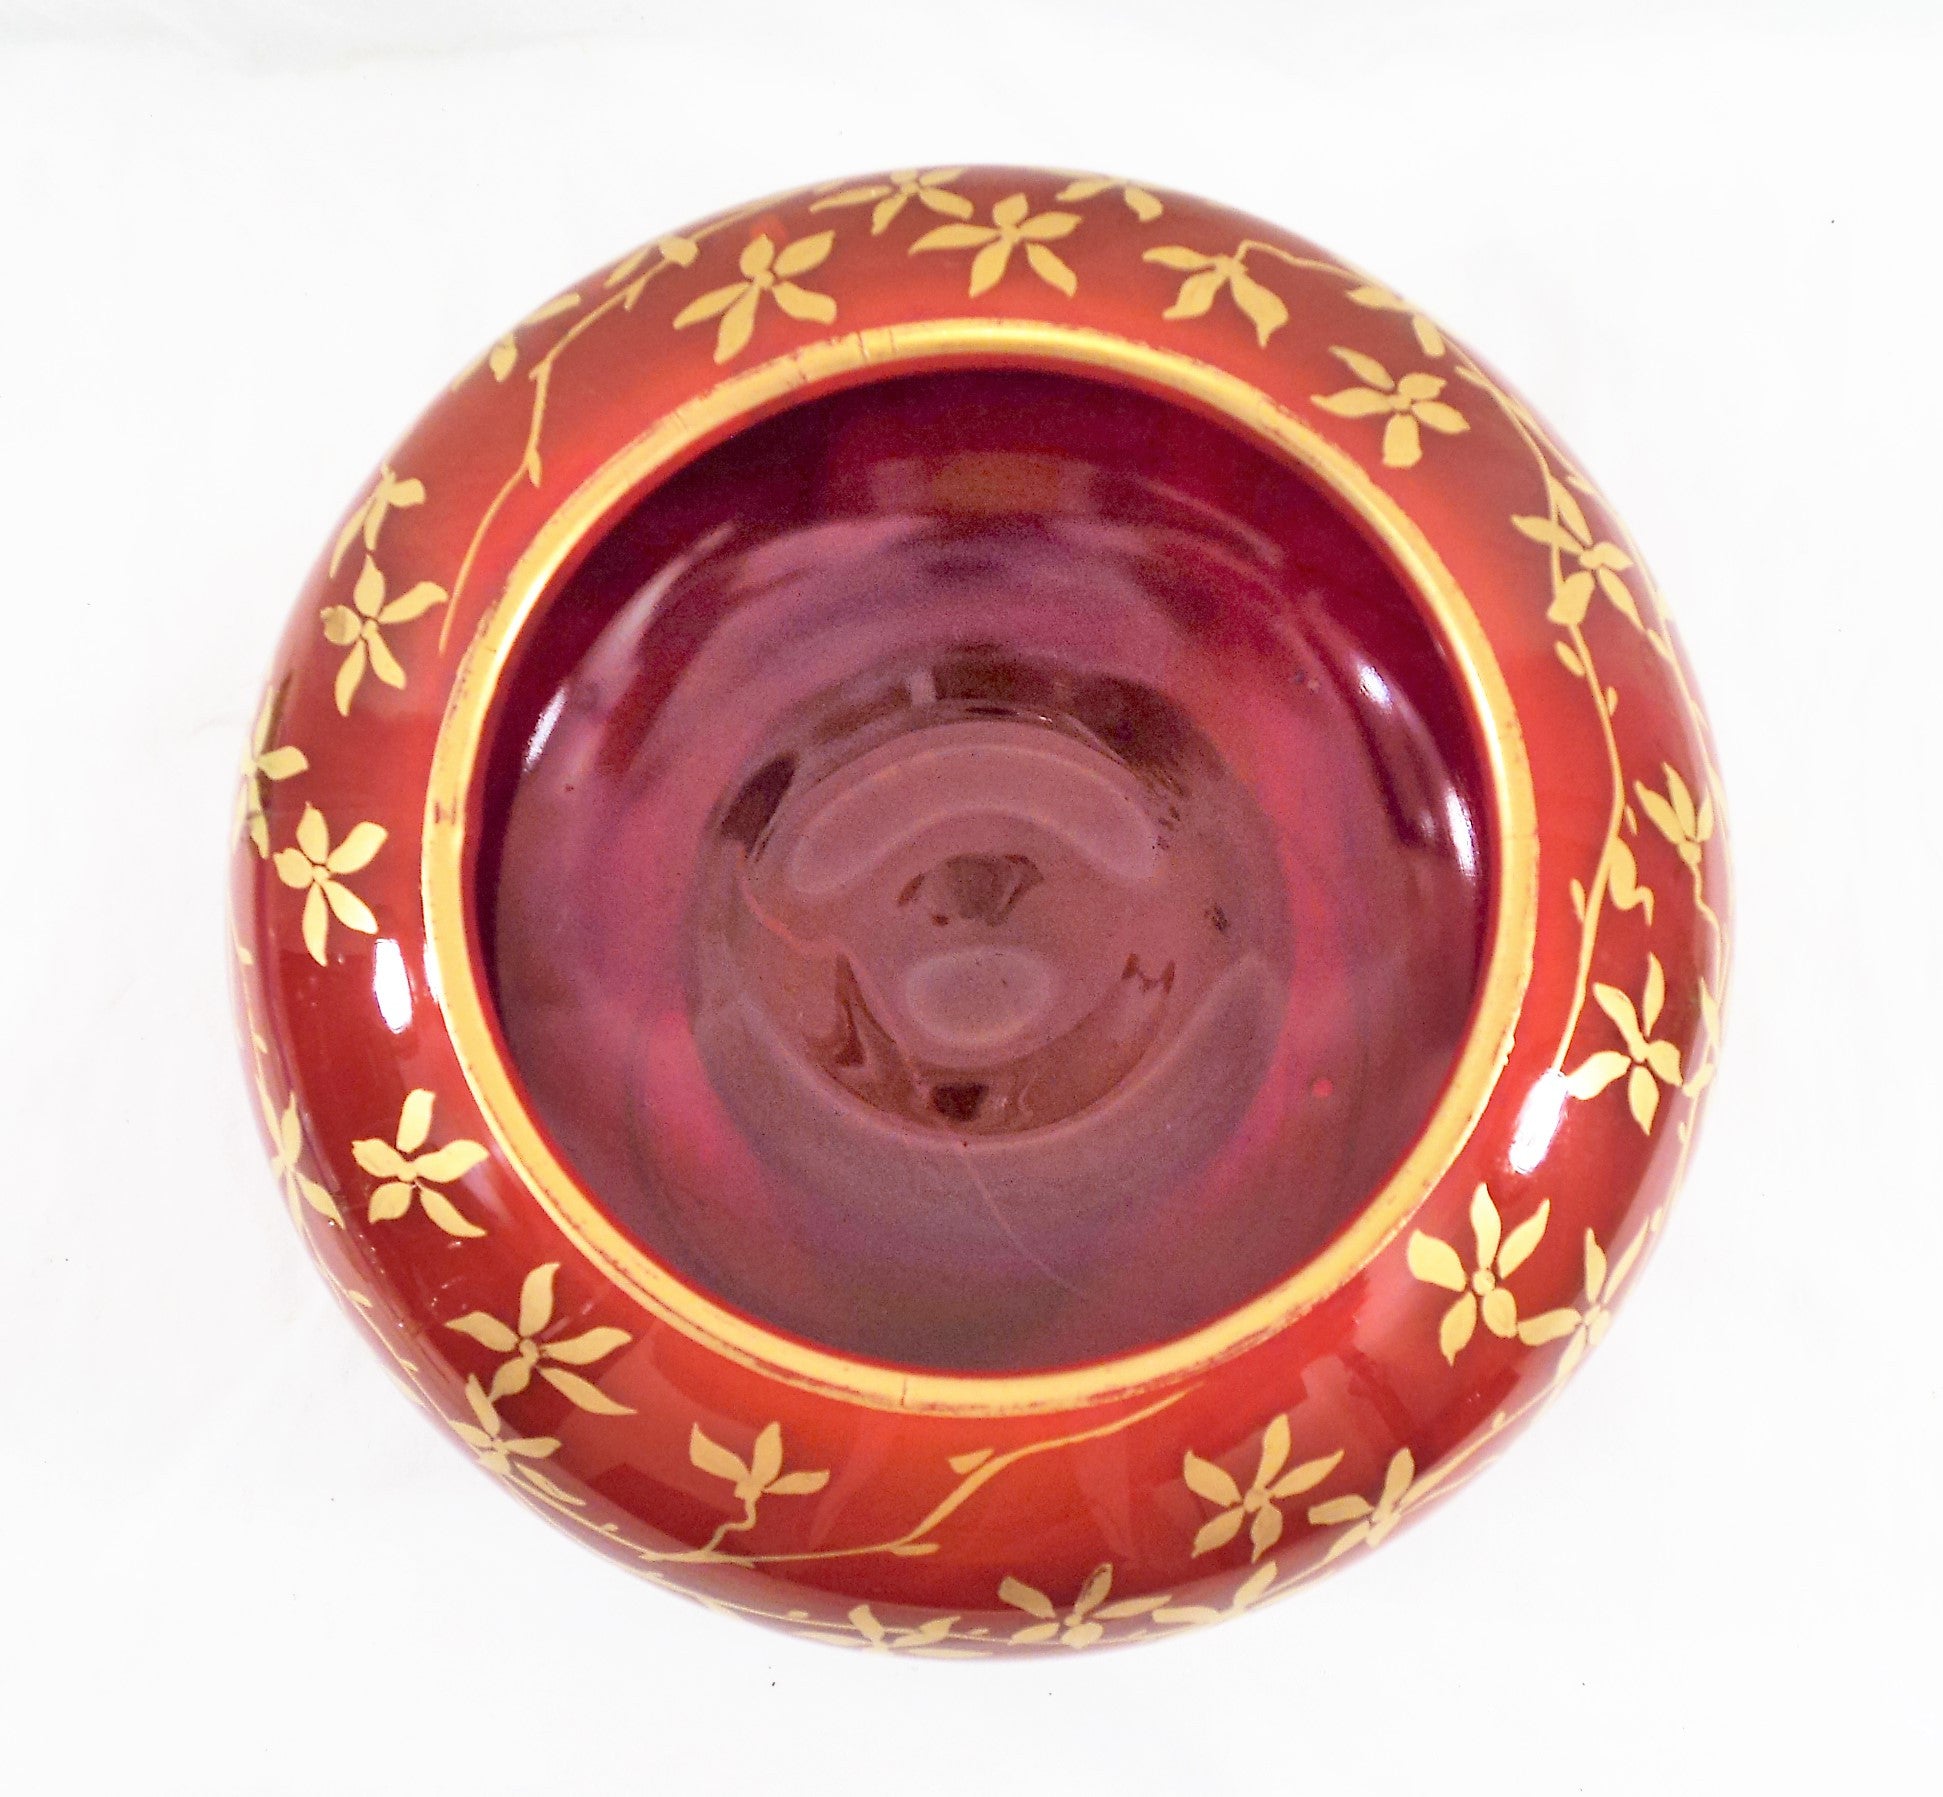 Vintage Molded Red Art Glass Bowl with Gold Accents